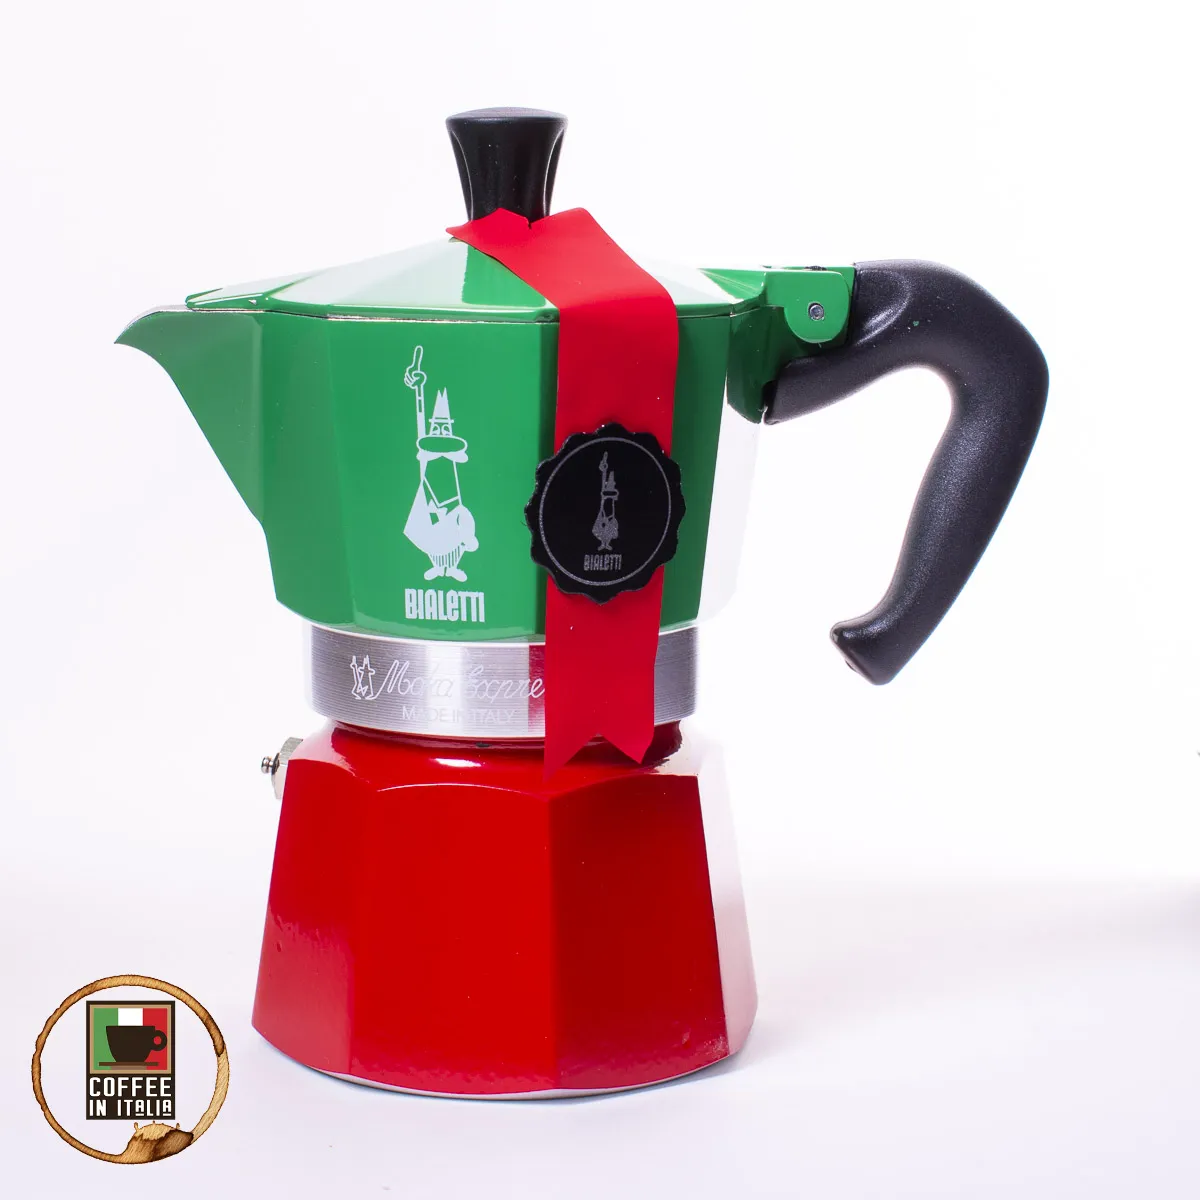 What Is Special About Bialetti - Moka Express